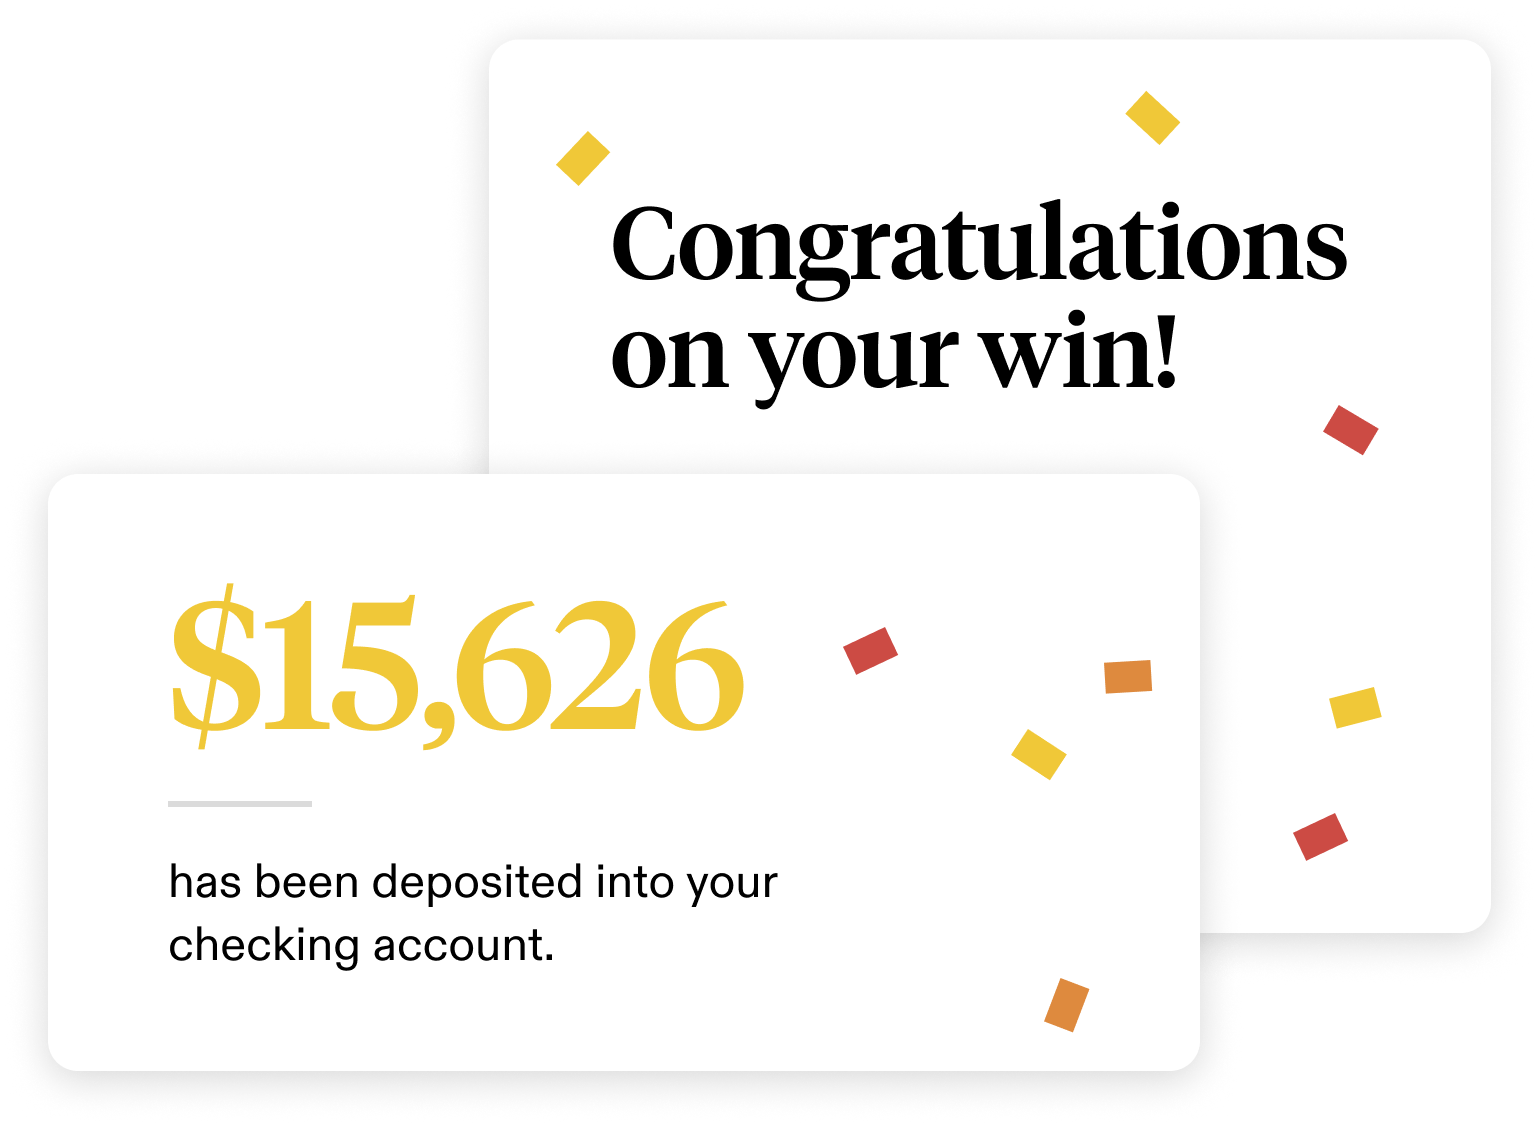 Example of a congratulations and payout amount.